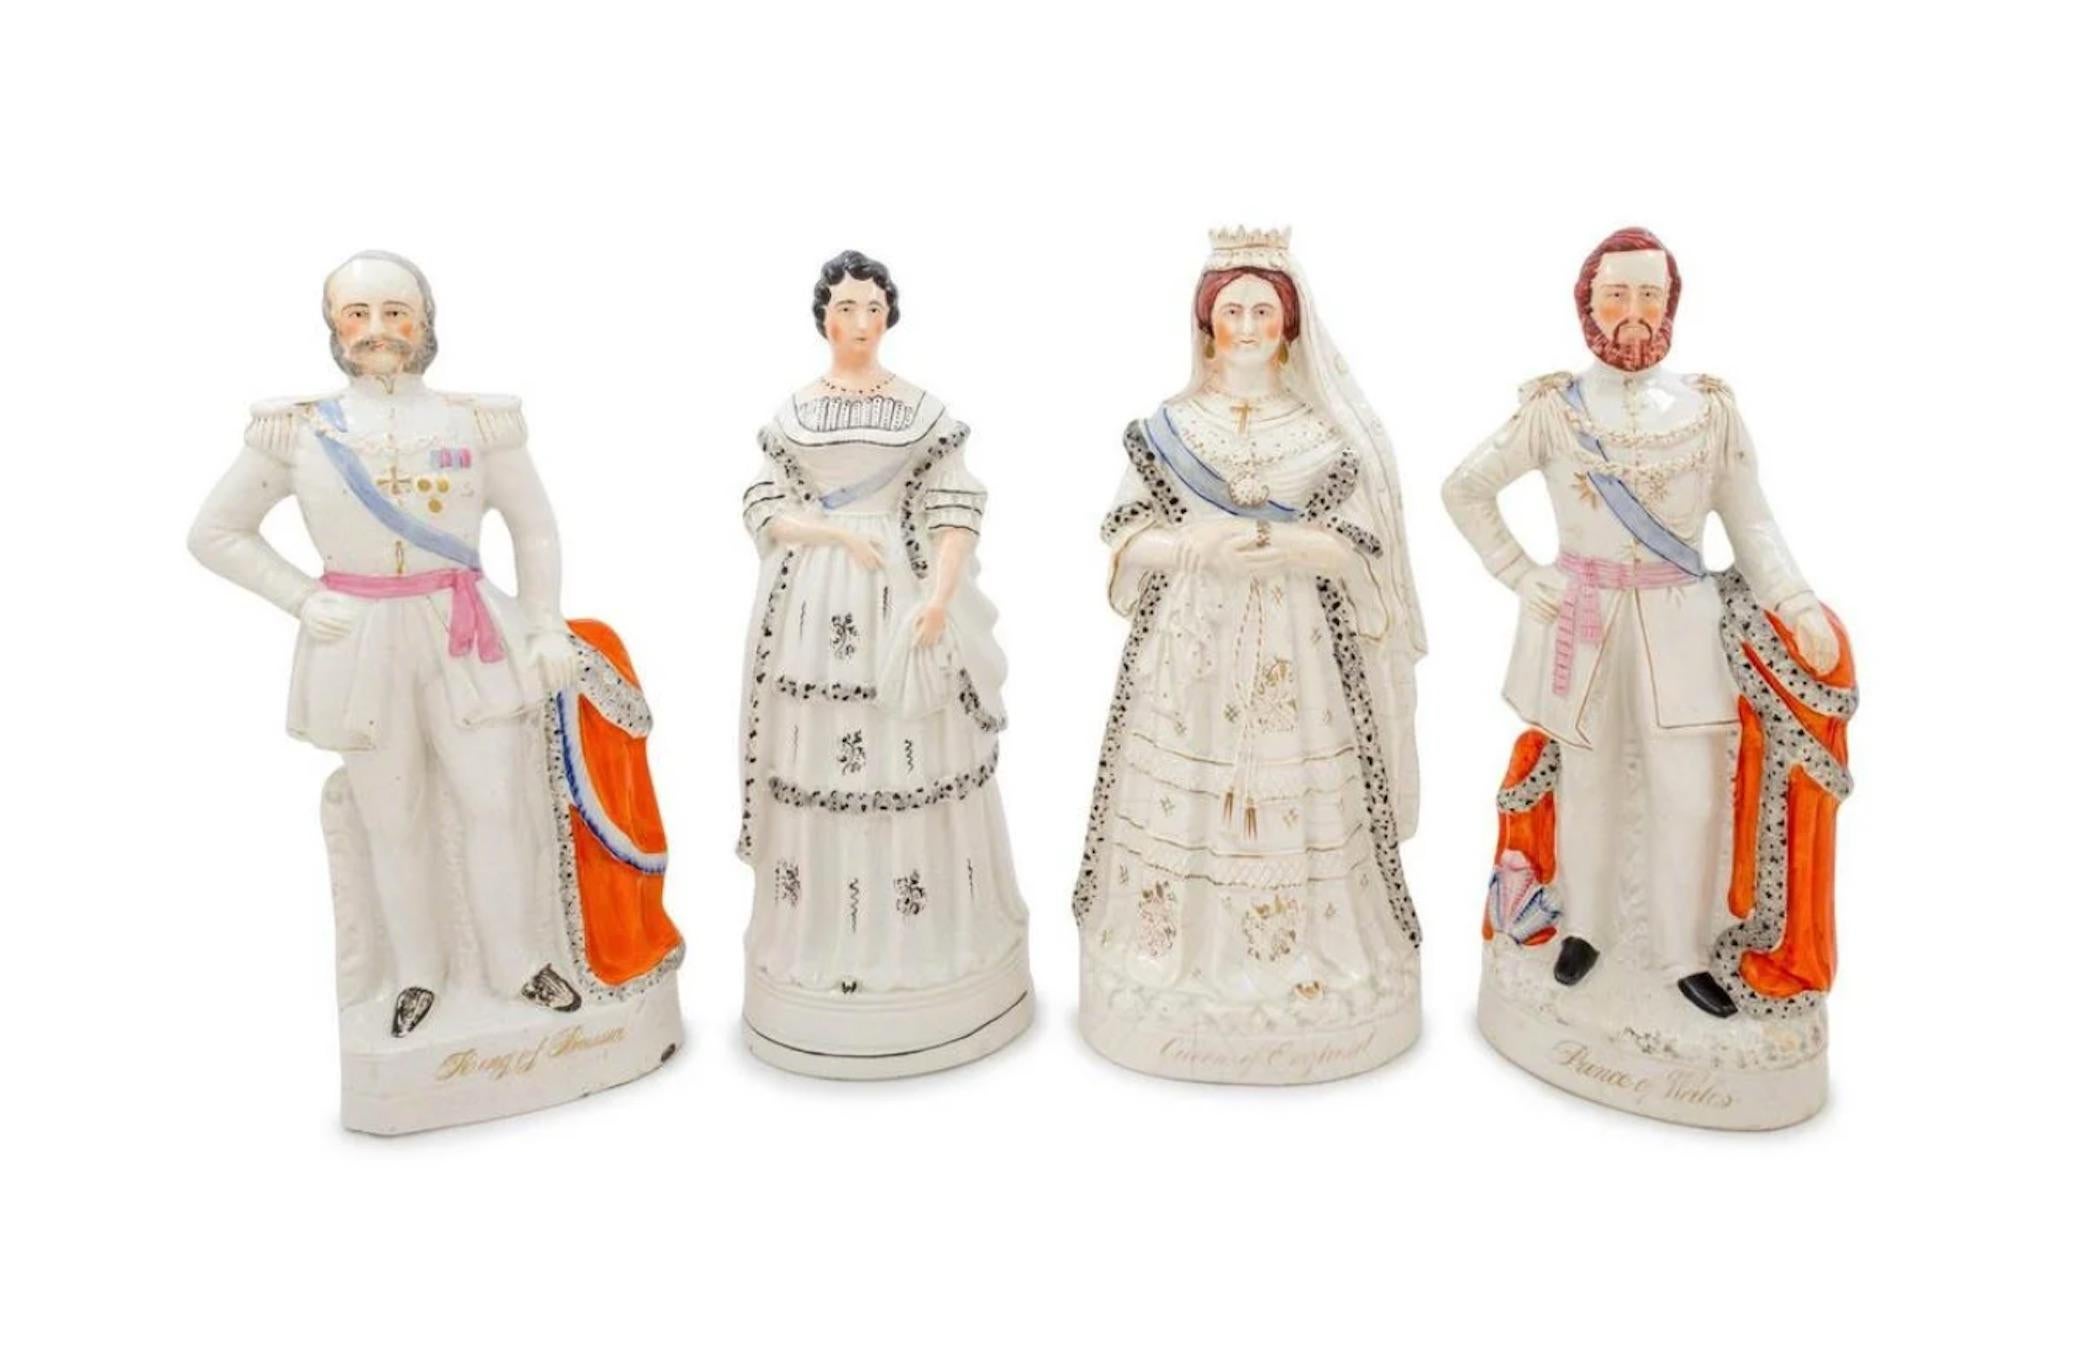 Collection Of six 19th century Staffordshire pottery royal figures of large-scale, Including Queen Victoria of England, Prince of Wales and others.  Priced per figure and will break up the collection of six.